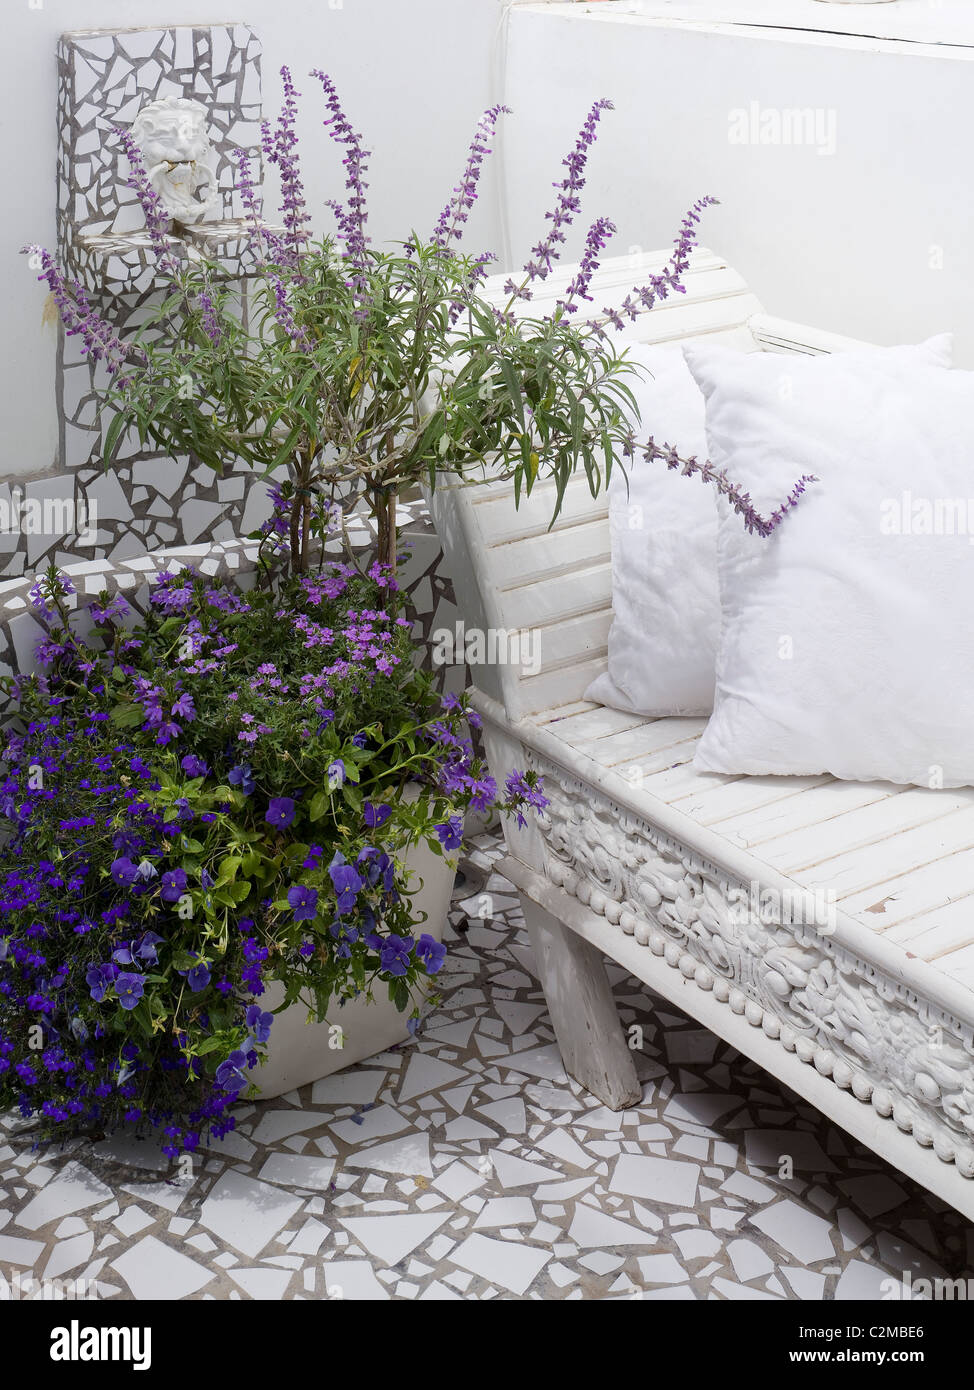 Detail of white terrazzo tiling, white wooden seating and blue and mauve flowers in pot Stock Photo